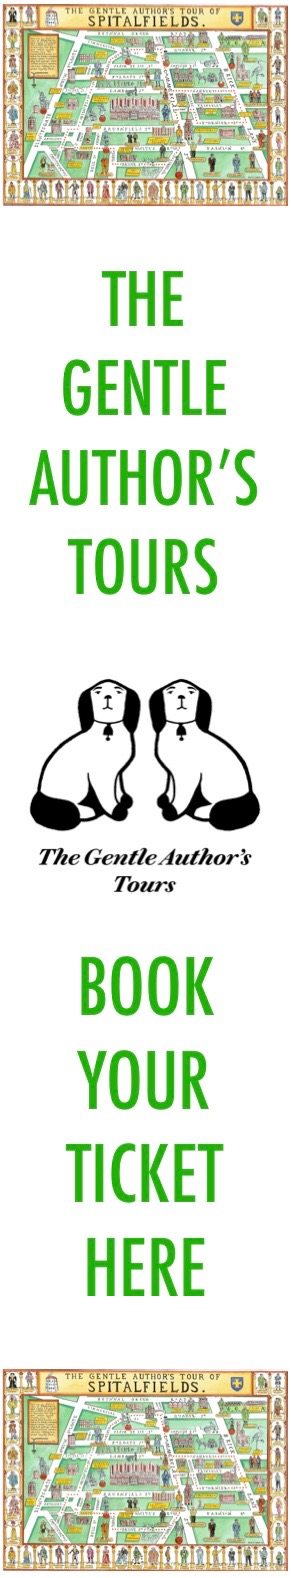 Advert for The Gentle Authors Tours